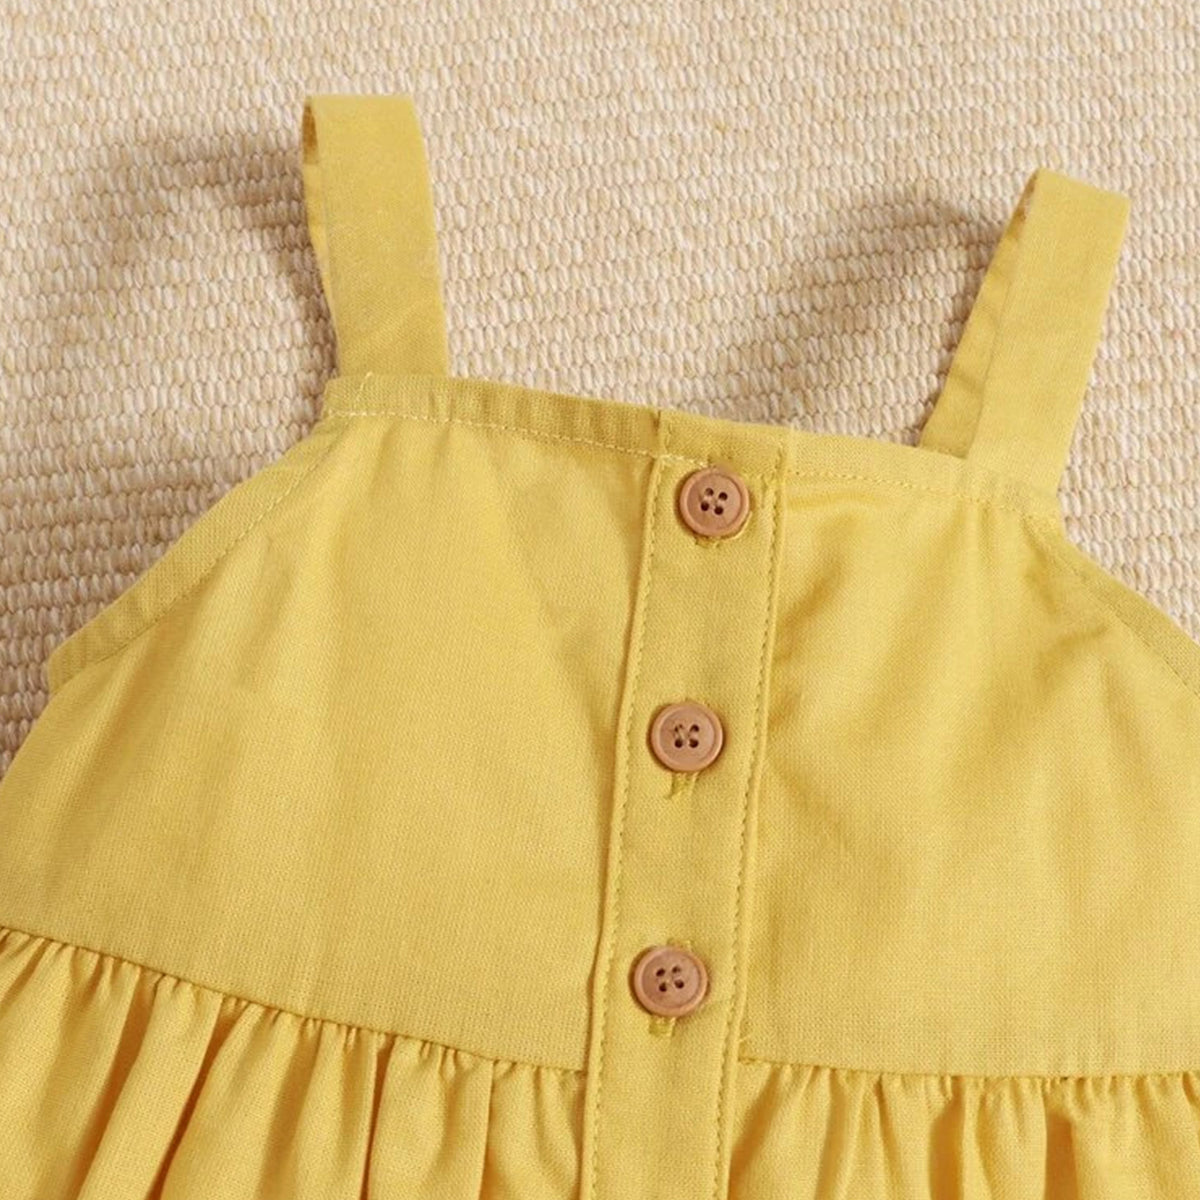 Babydoll Stylish Yellow Solid Designer Tunic Frock_Dresses for Baby Girl.